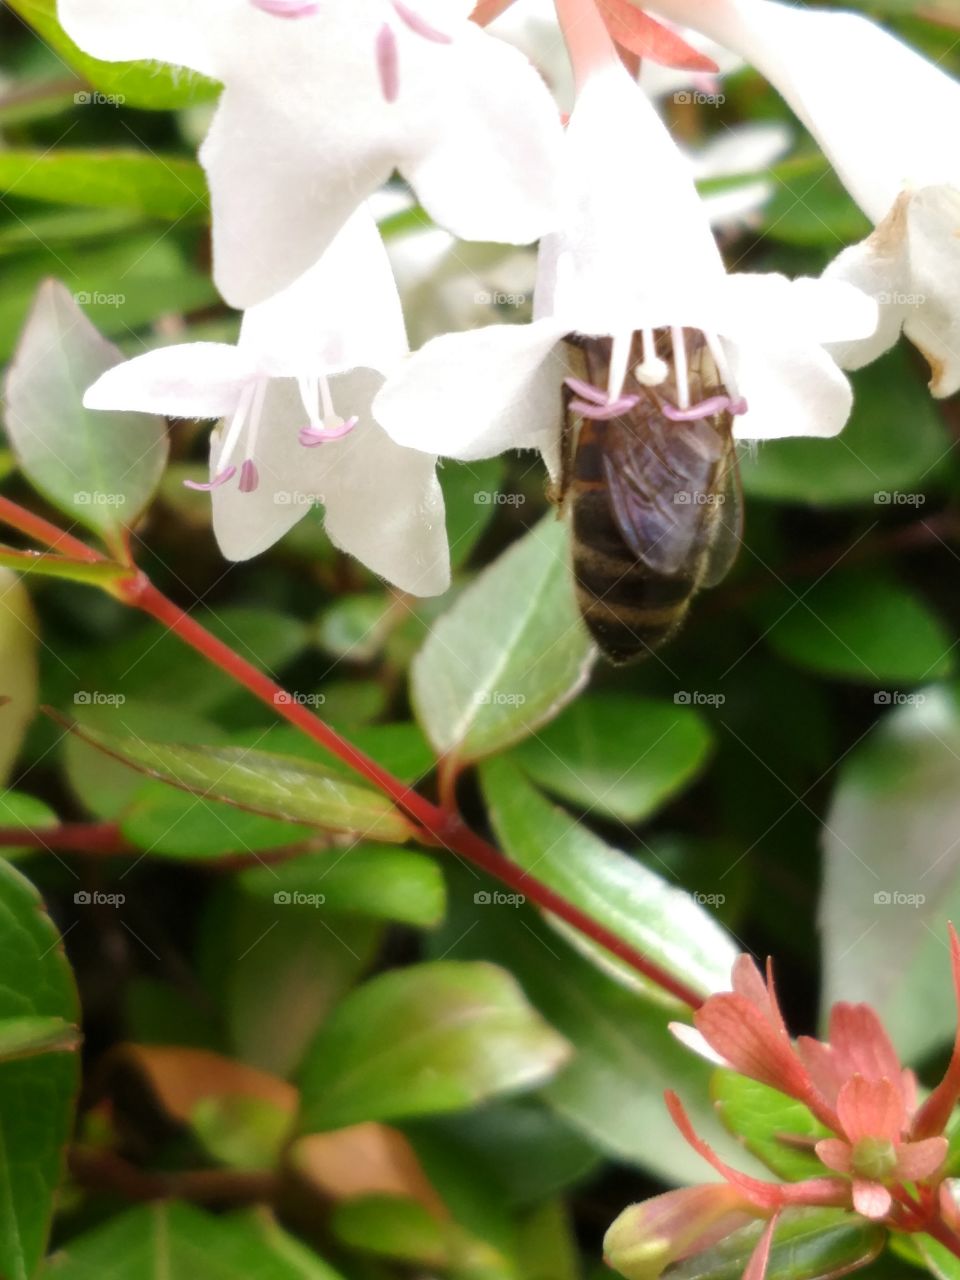 Just a bee doing her work in the flower like a boss